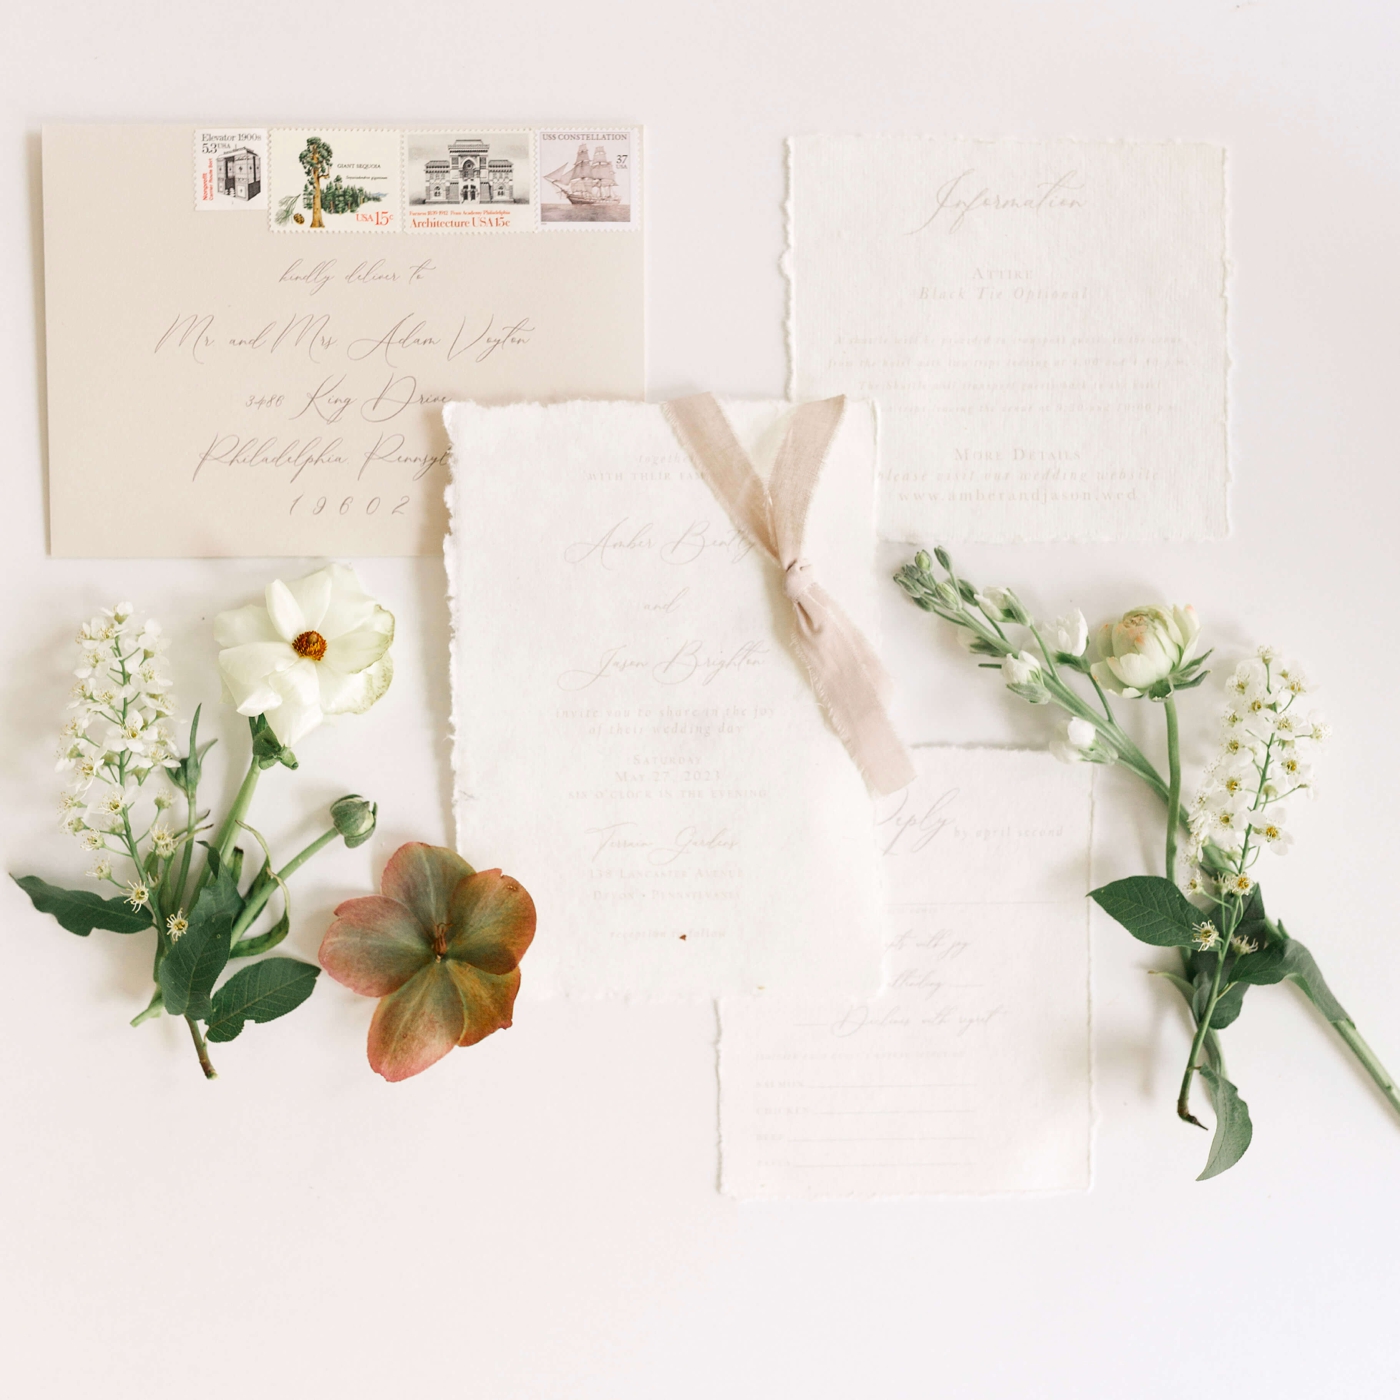 Flatlay photograph of a wedding invitation suite by RSVP Love